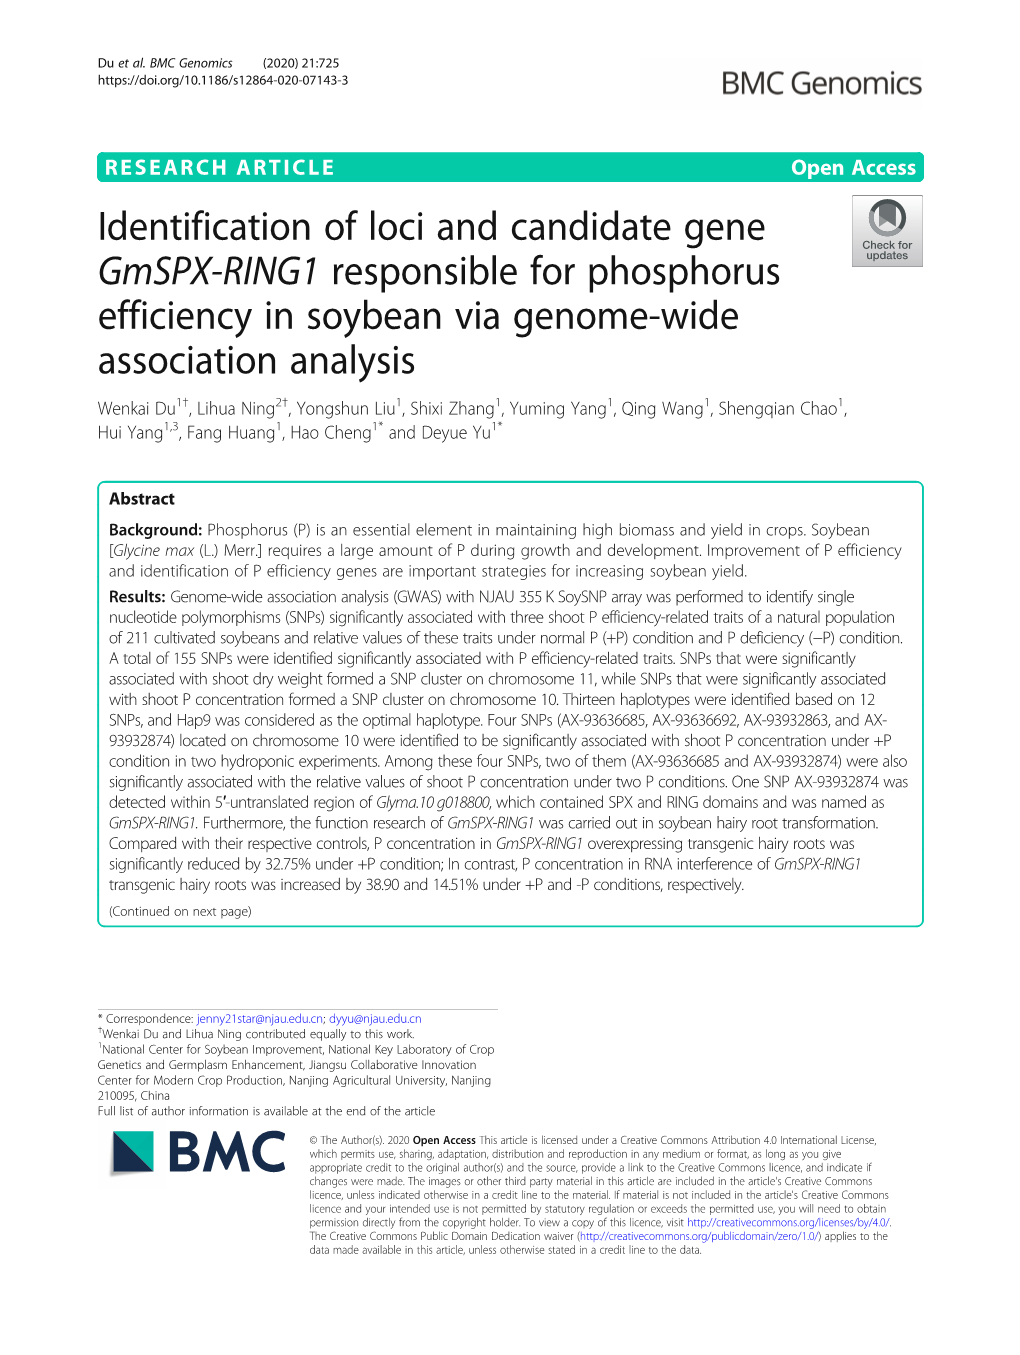 Identification of Loci and Candidate Gene Gmspx-RING1 Responsible for Phosphorus Efficiency in Soybean Via Genome-Wide Associati